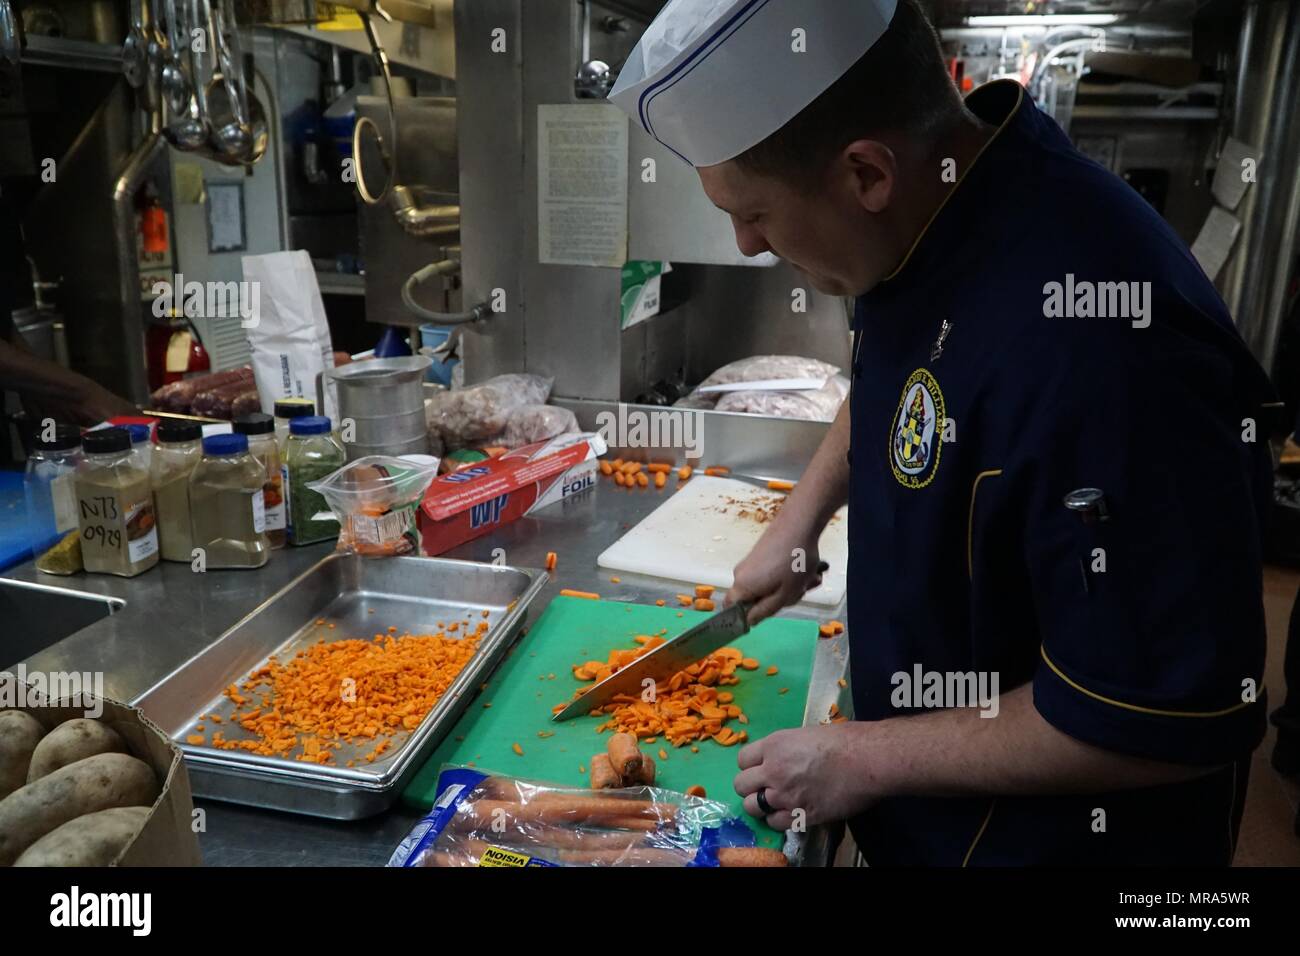 170525-N-QX001-002  ATLANTIC OCEAN (May 29, 2017) Culinary Specialist 2nd Class Drew Iverson, from Nacogdoches, Texas,  dices carrots while preparing lunch for the crew  of the Arleigh Burke-class guided-missile destroyer USS James E. Williams (DDG 95) May 29, 2017. James E. Williams, homeported in Norfolk, Virginia, is on a routine deployment to the U.S. 6th Fleet area of operations in support of U.S. national security interests in Europe. (U.S. Navy photo by Lt. j.g. Reuben Carson/Released) Stock Photo